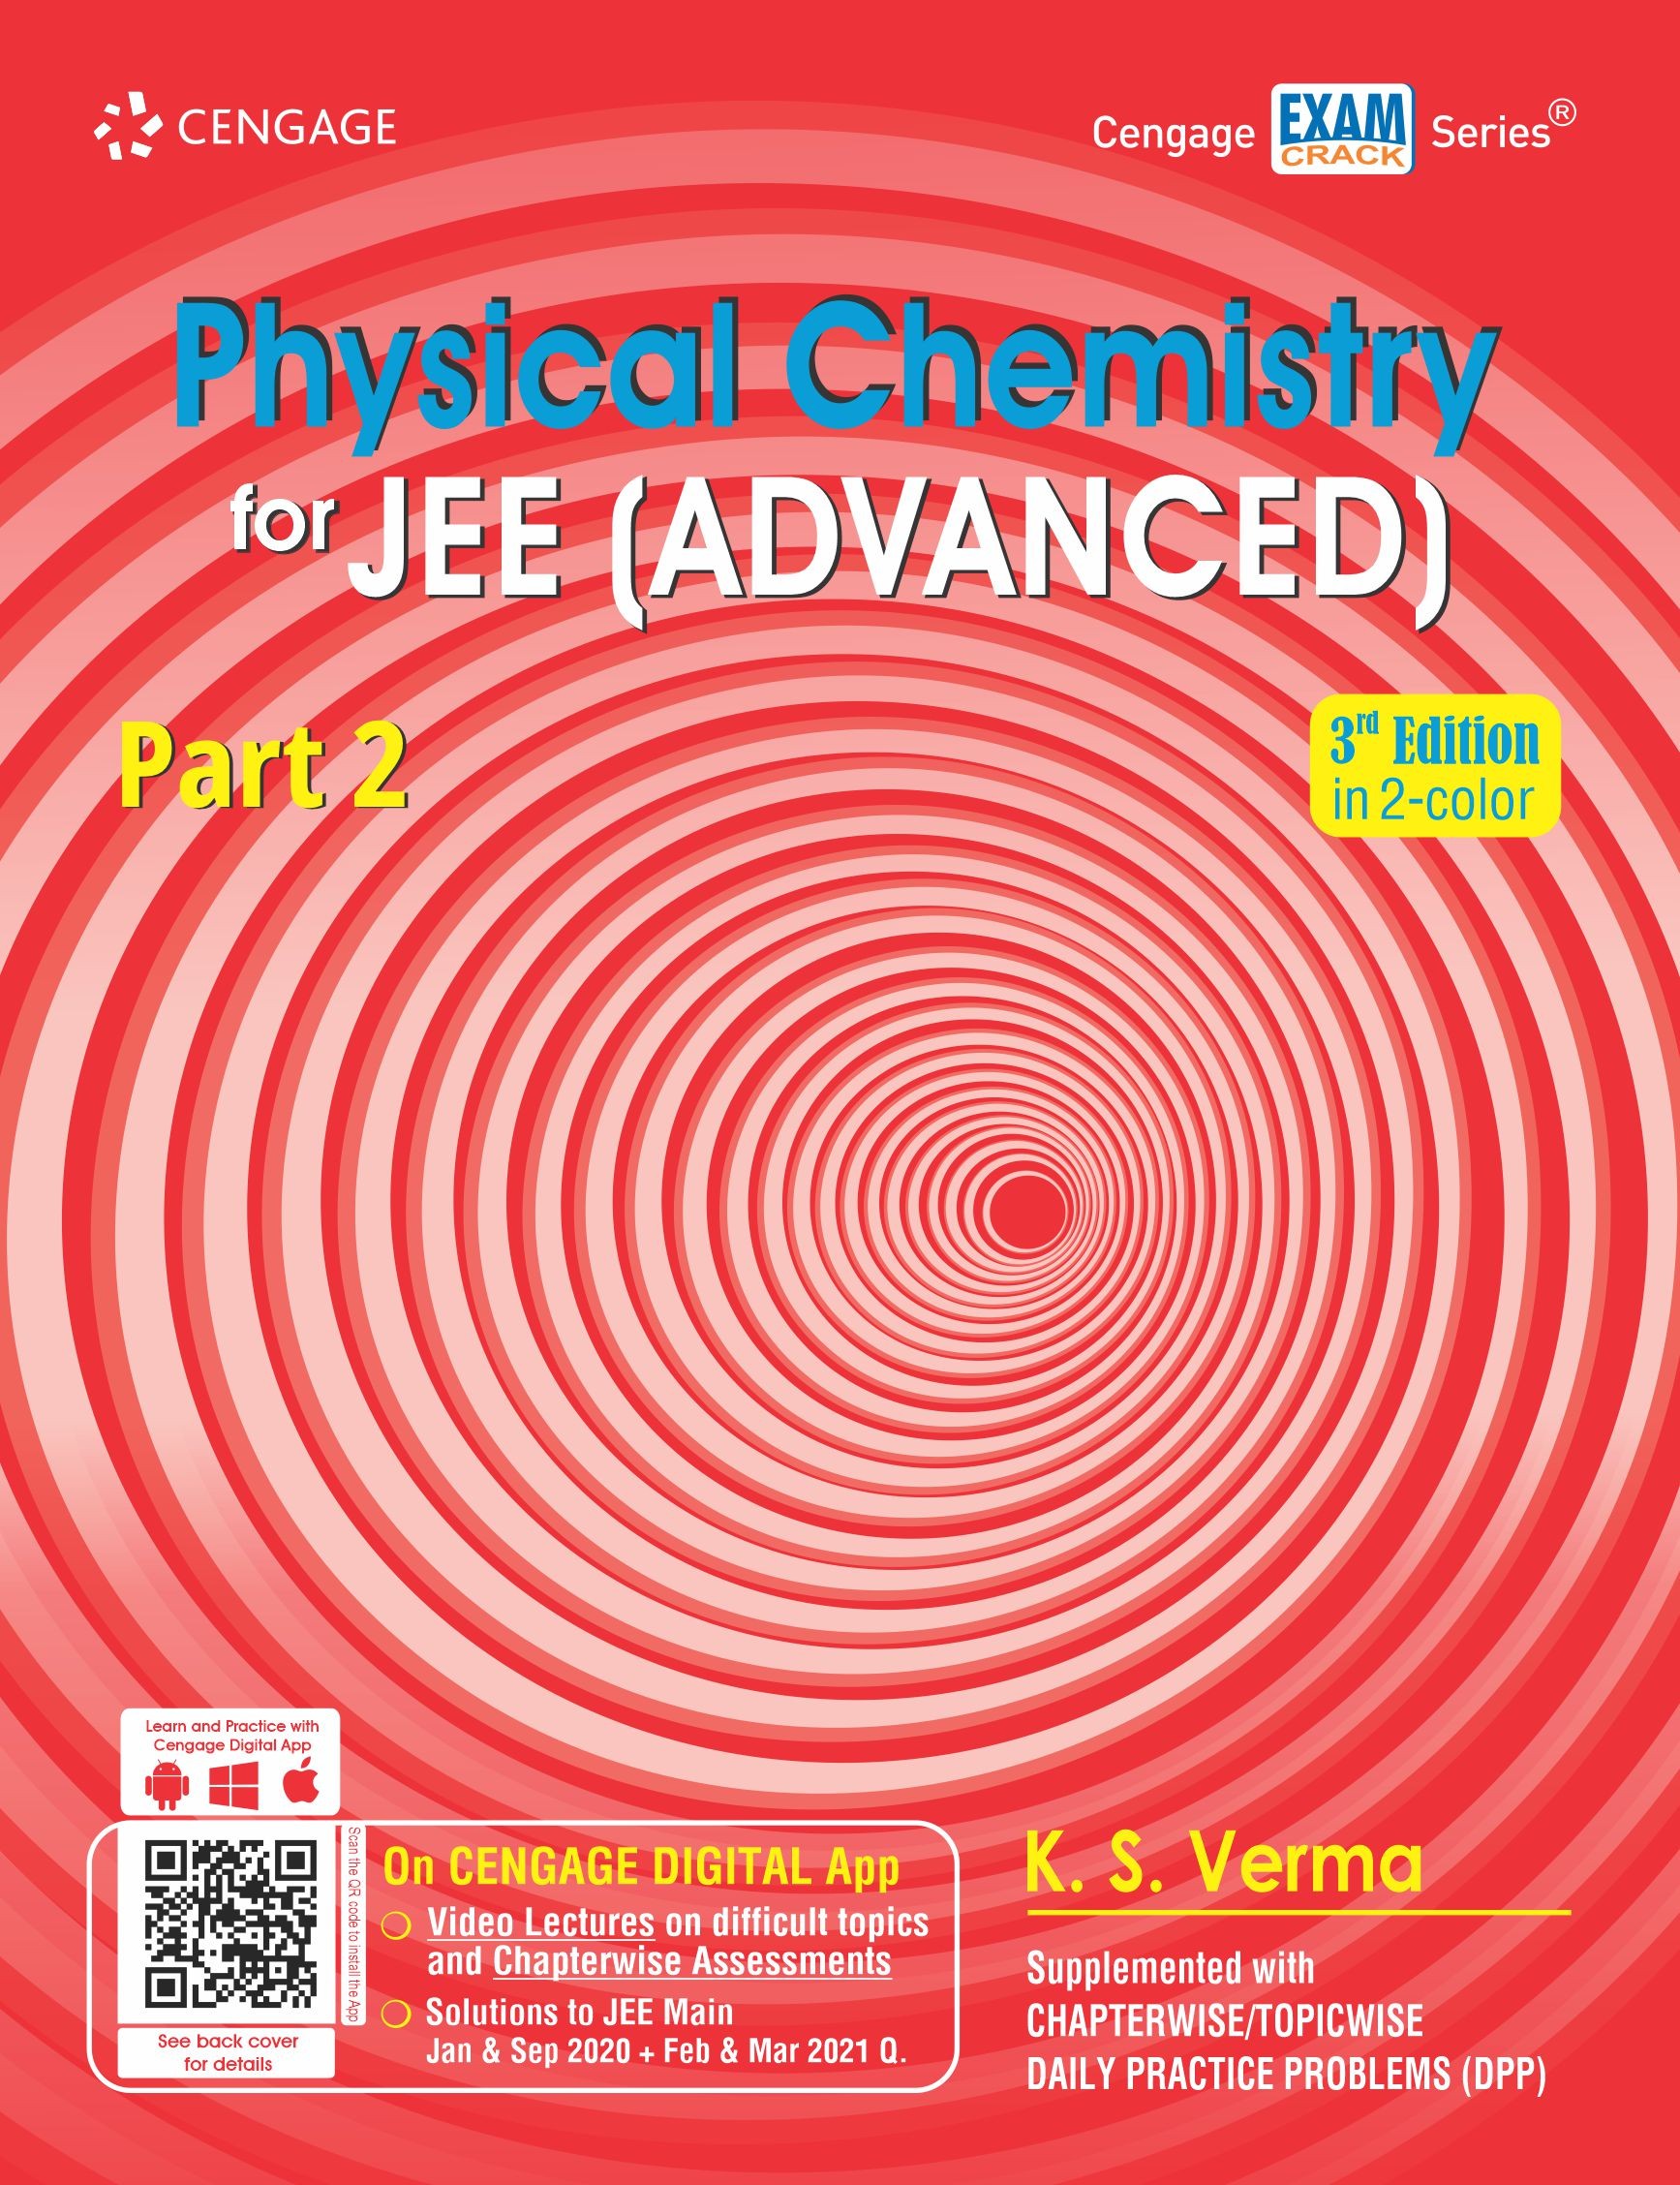 Cengage Physical Chemistry for JEE (Advanced): Part 2, 3e By : K. S. Verma